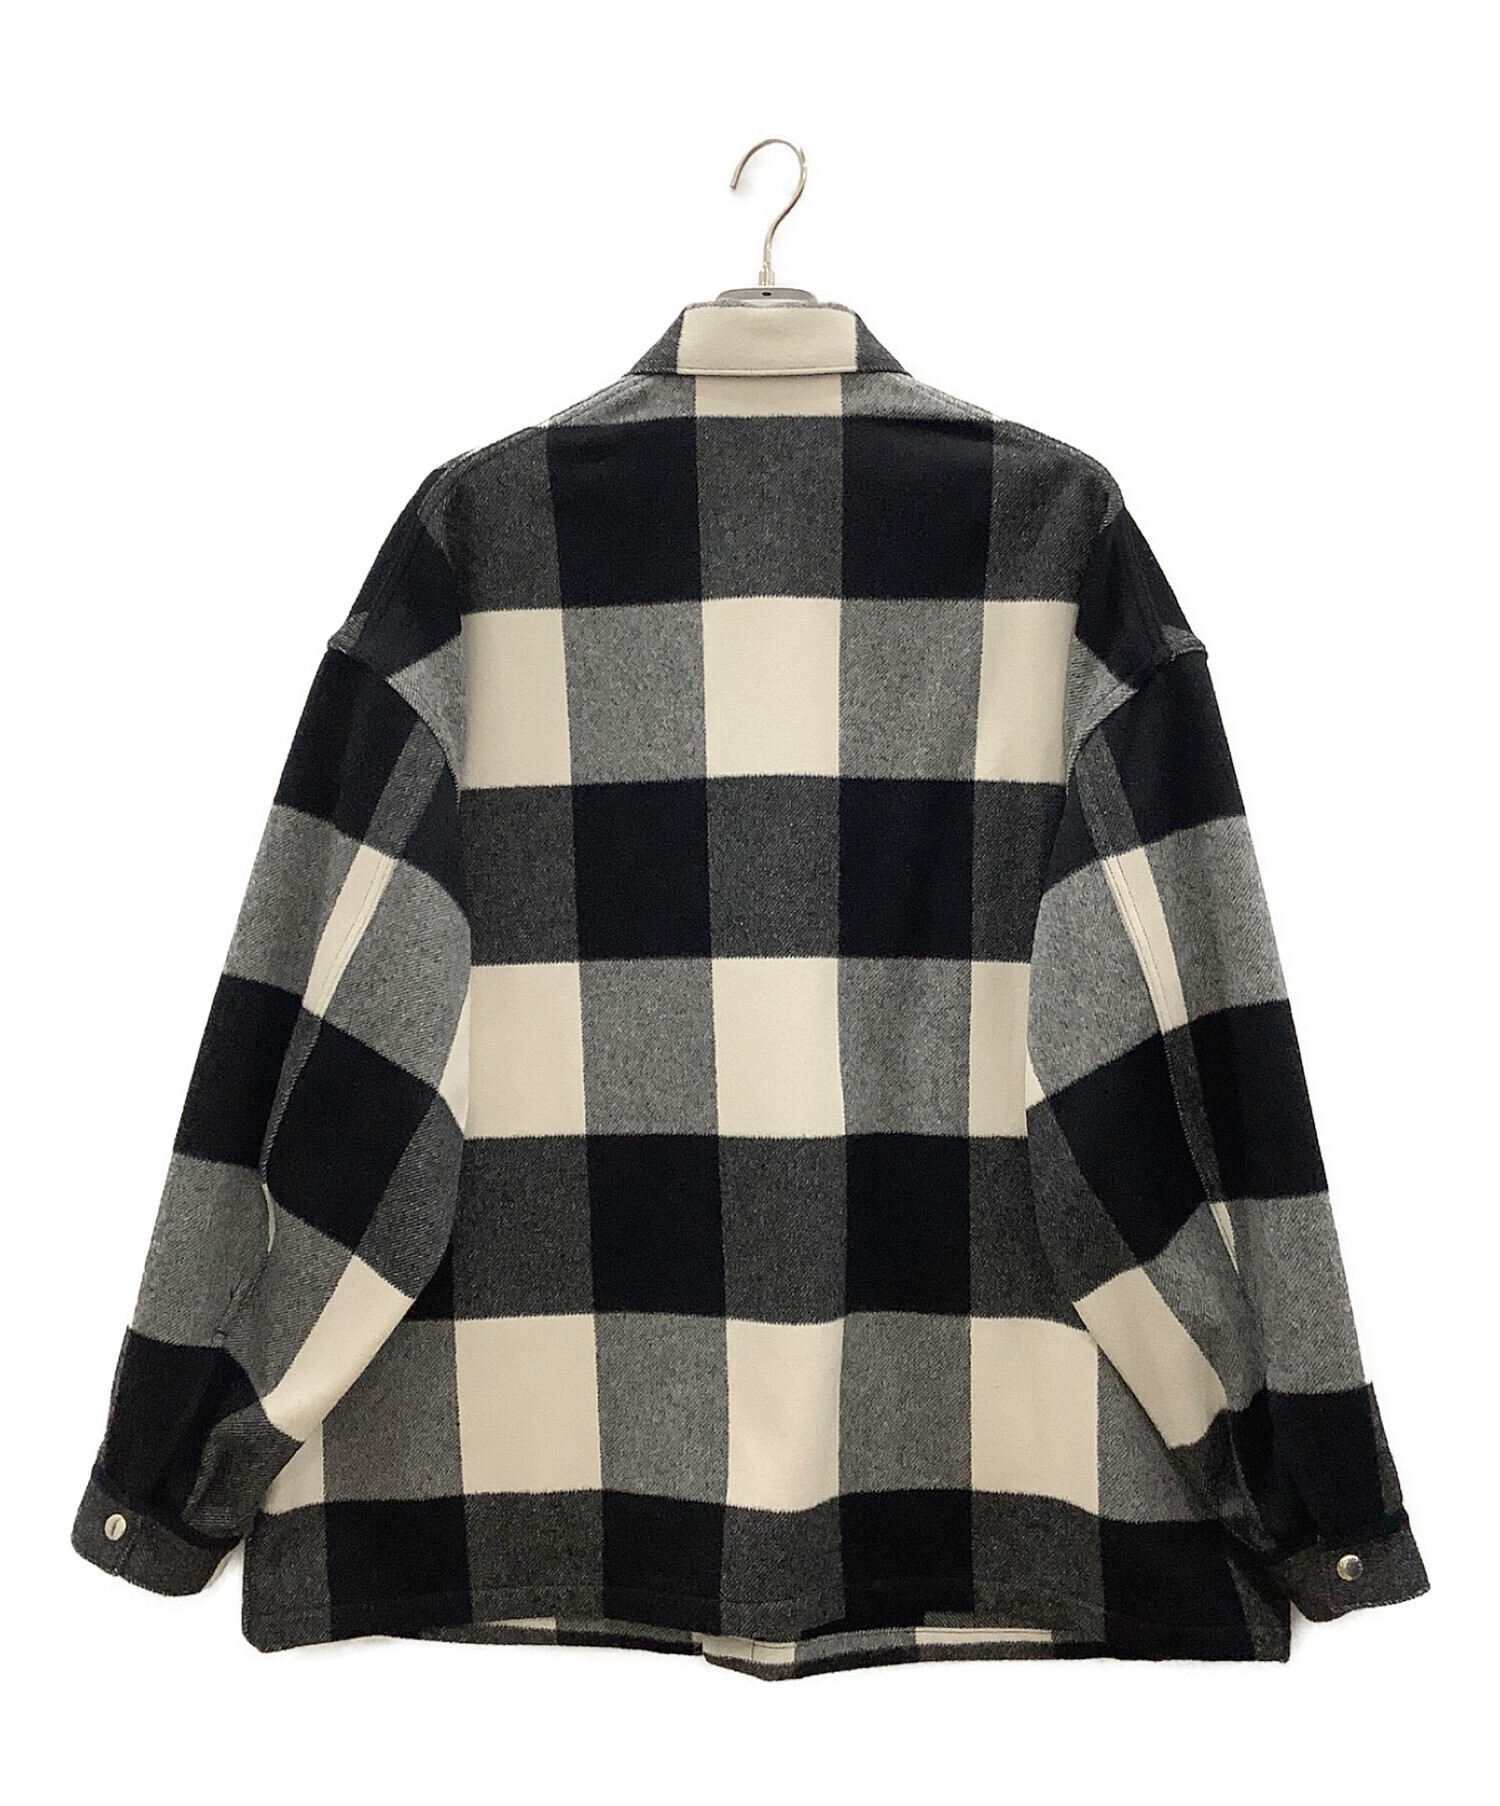 COOTIE PRODUCTIONS (クーティープロダクツ) COOTIE PRODUCTIONS　Buffalo Check Wool  Coverall ブラック×ホワイト サイズ:Mサイズ